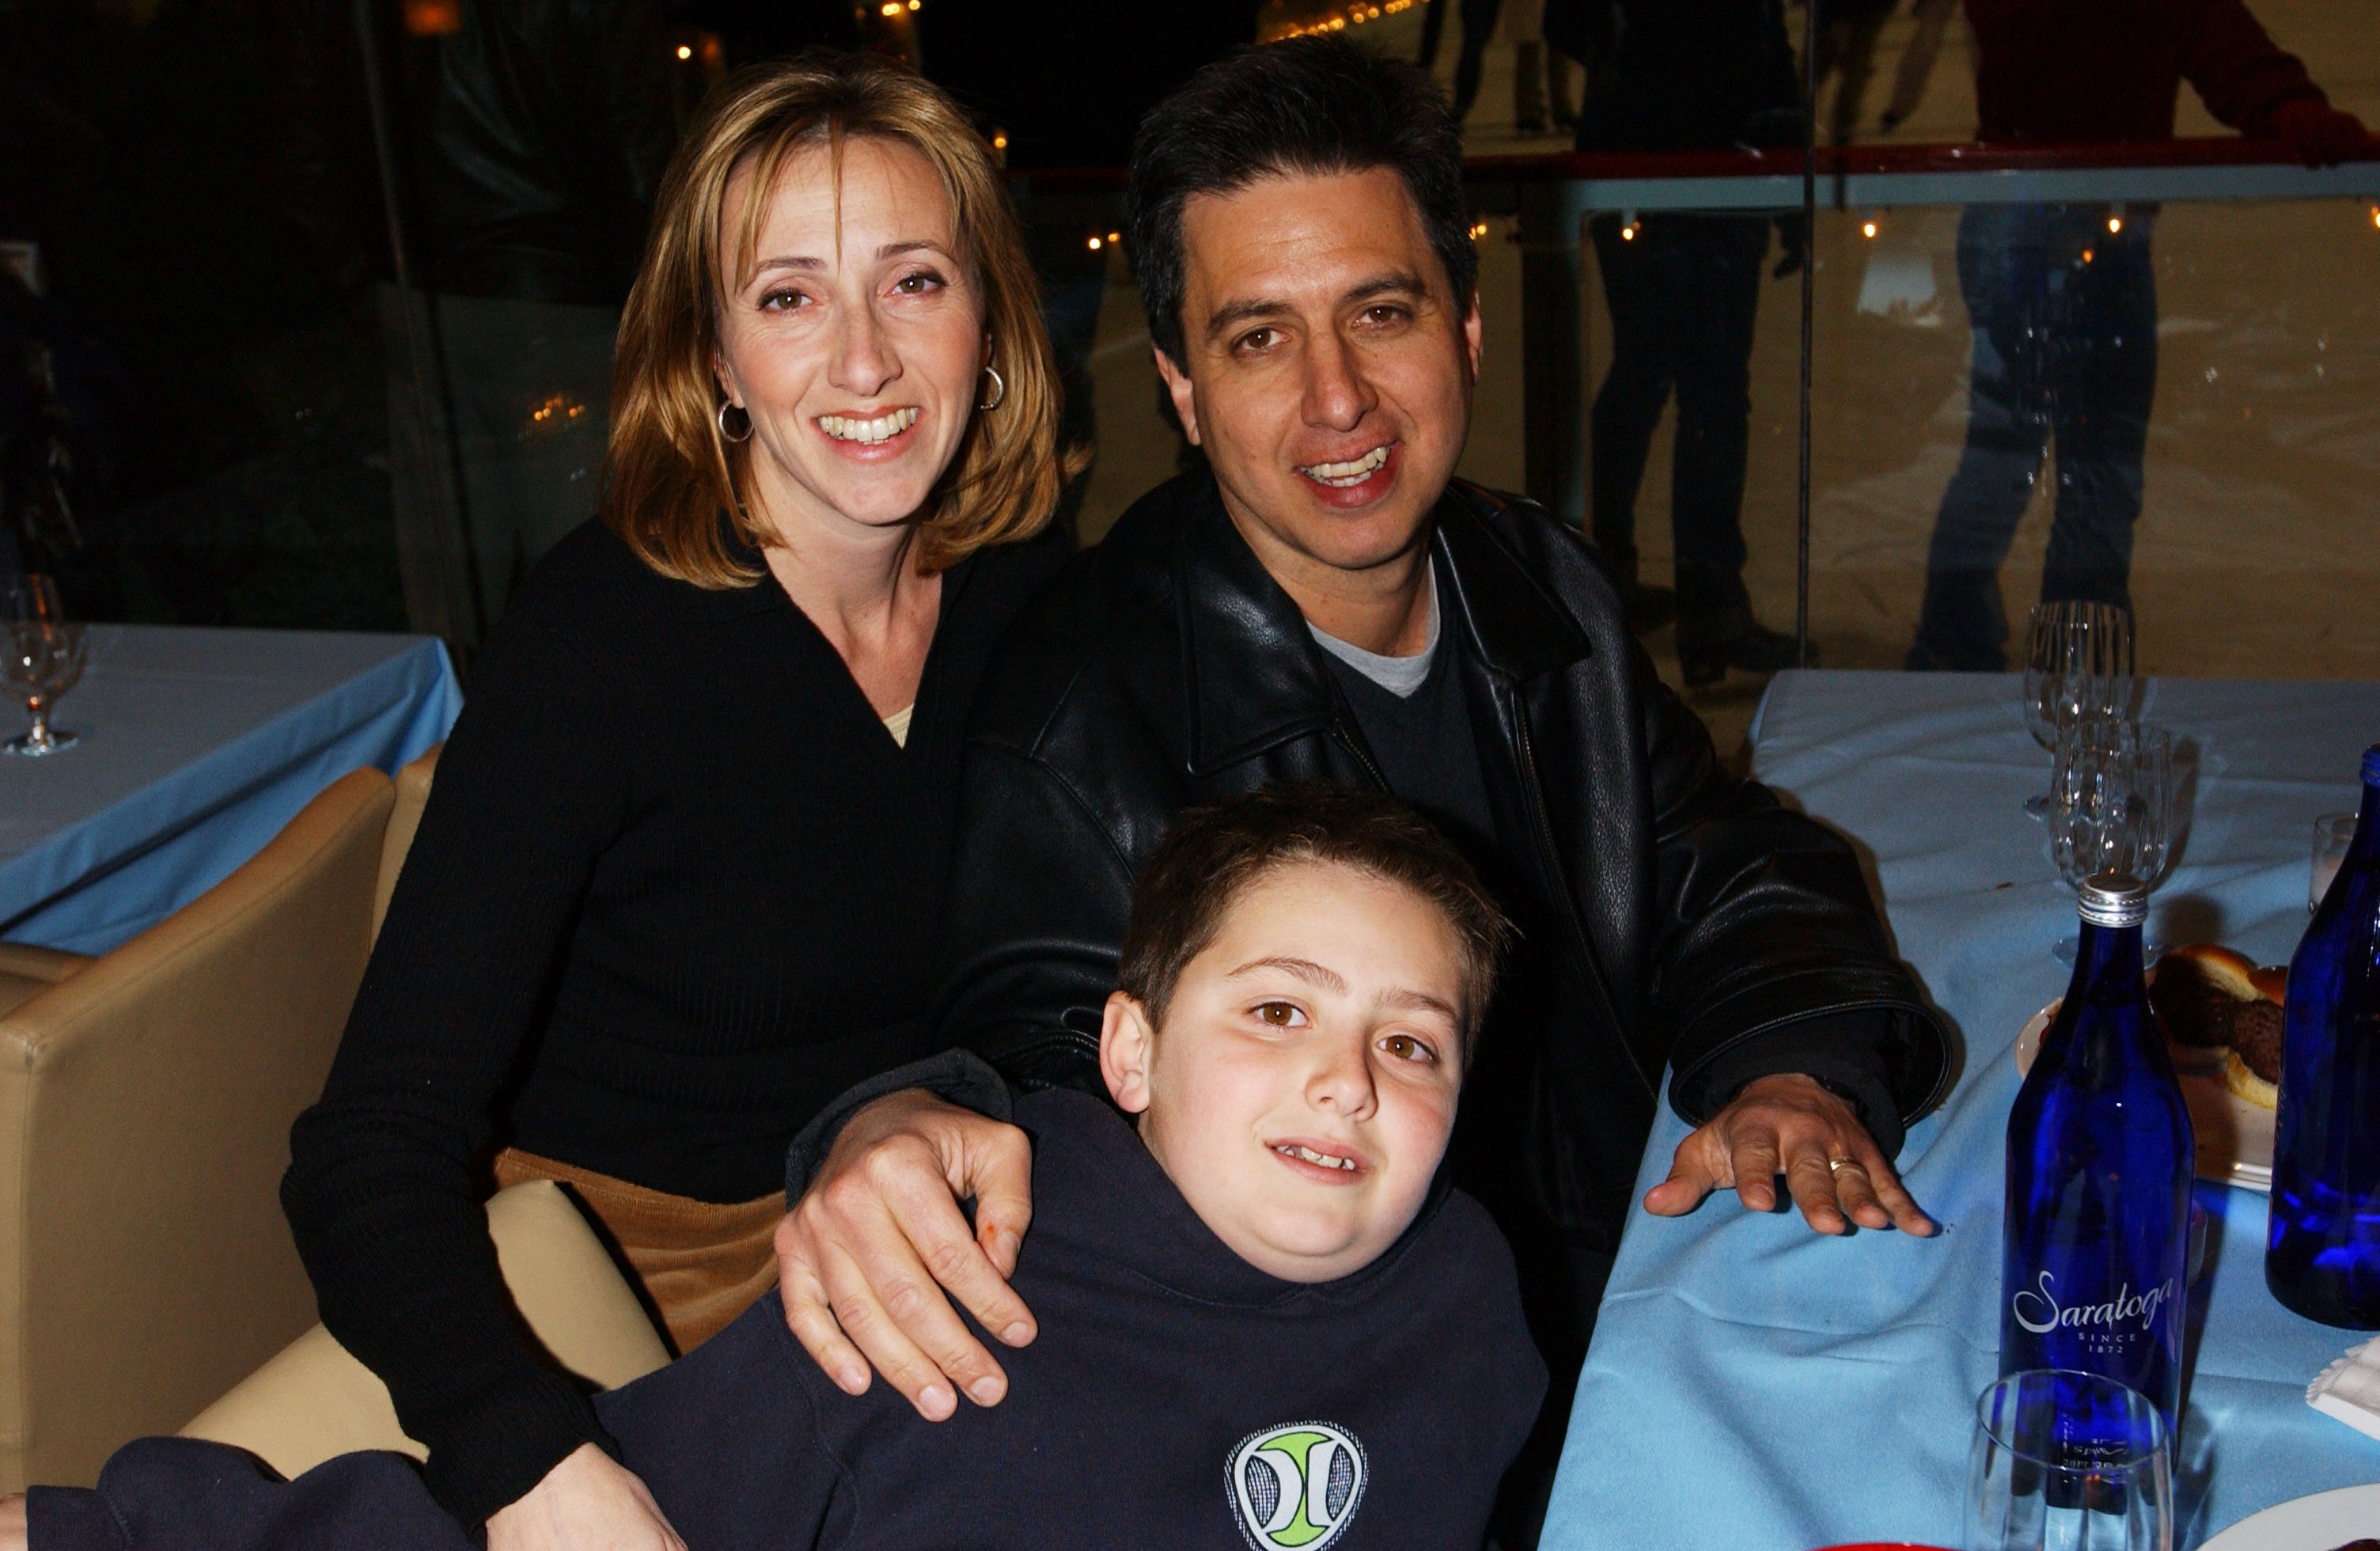 Ray Romano with his wife Anna Scarpulla and their son Gregory during a party at the Rockefeller Center ice rink for the World Premiere of Twentieth Century Fox's "Ice Age" at Radio City Music Hall in New York City on March 10, 2002 | Source: Getty Images